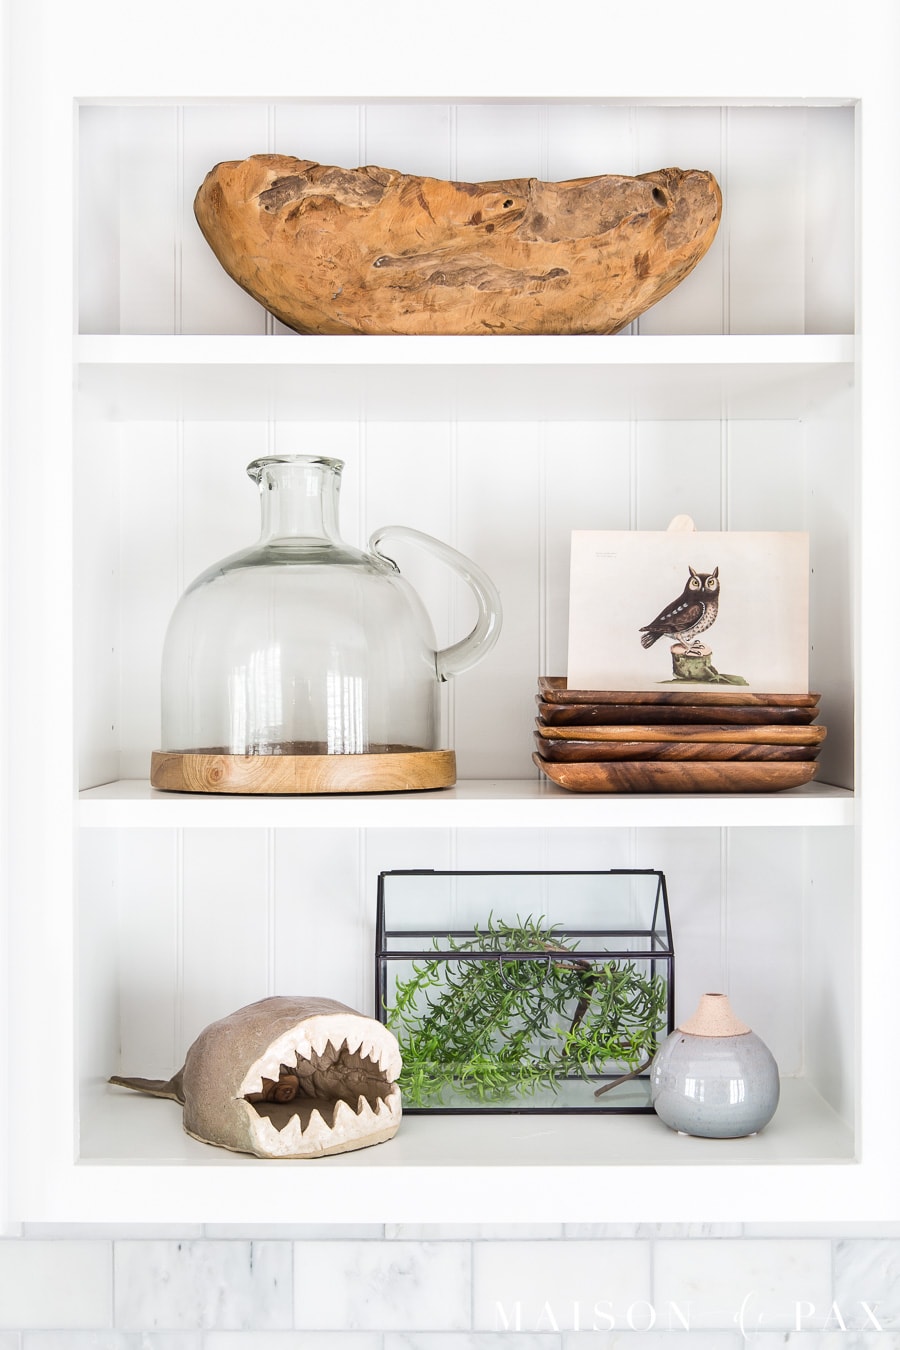 shelves styled with natural wood tones, greenery, and vintage art | Maison de Pax